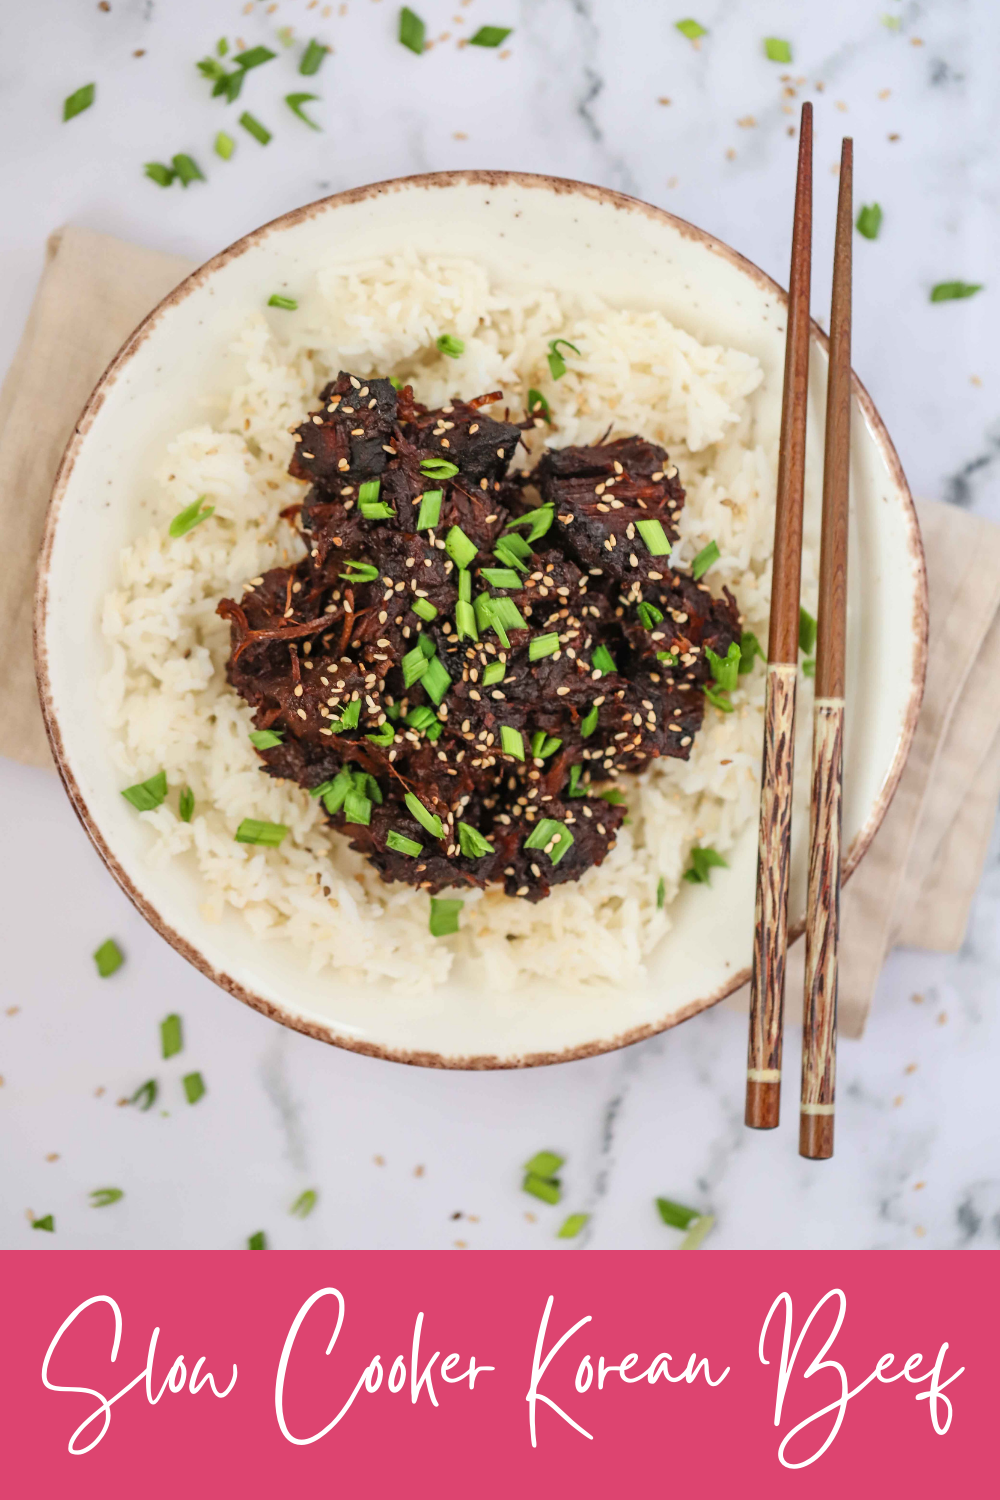 Slow cooker Korean Beef serving 8 this is a great meal prep recipe, or if you've got a big family. The tangy and tender beef will have even the fussiest eater asking for more.